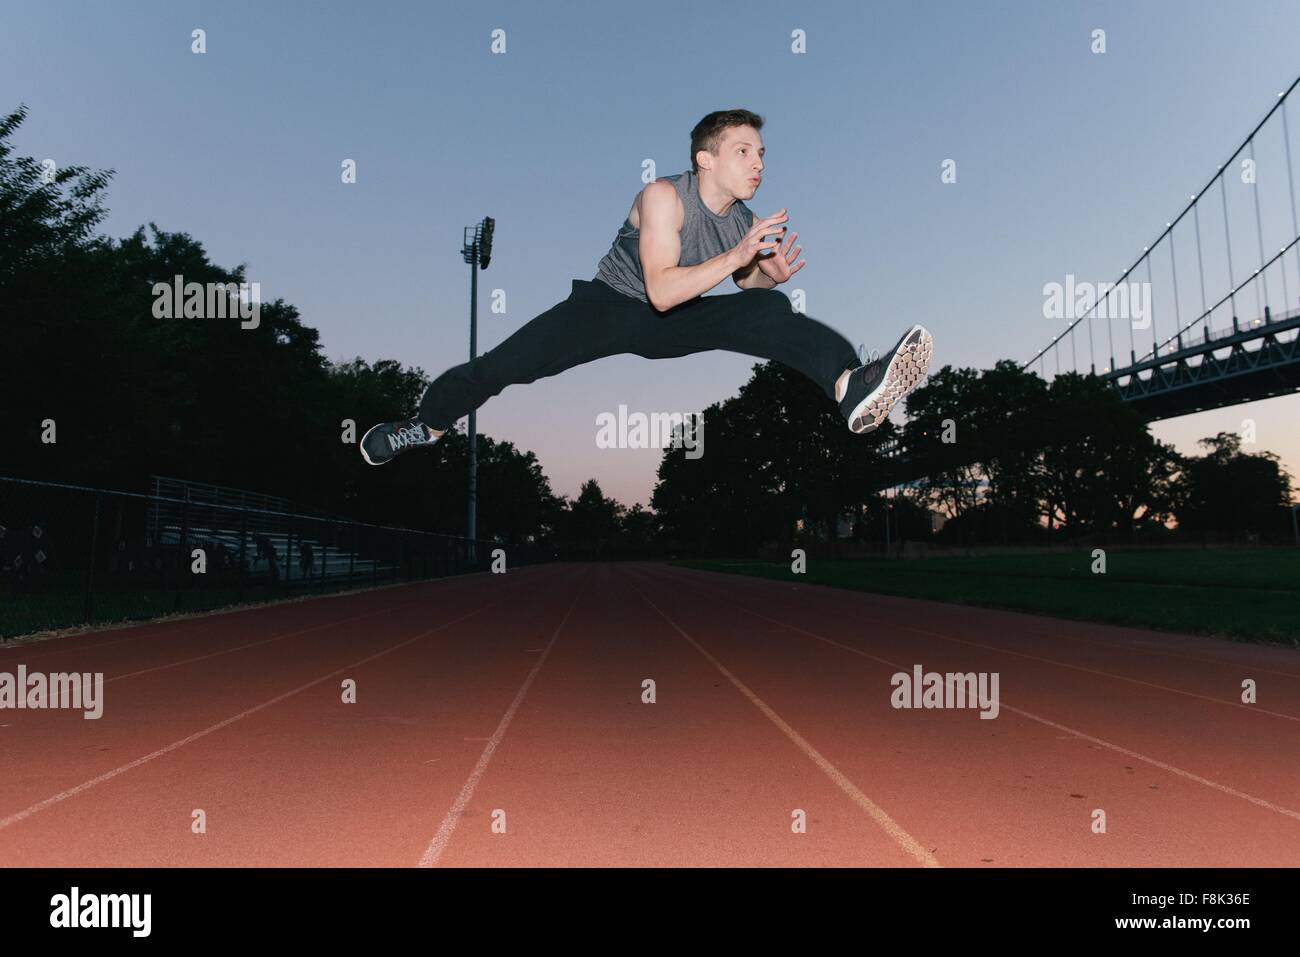 Young man jumping, mid air, on race track, sunset, low angle view Stock Photo